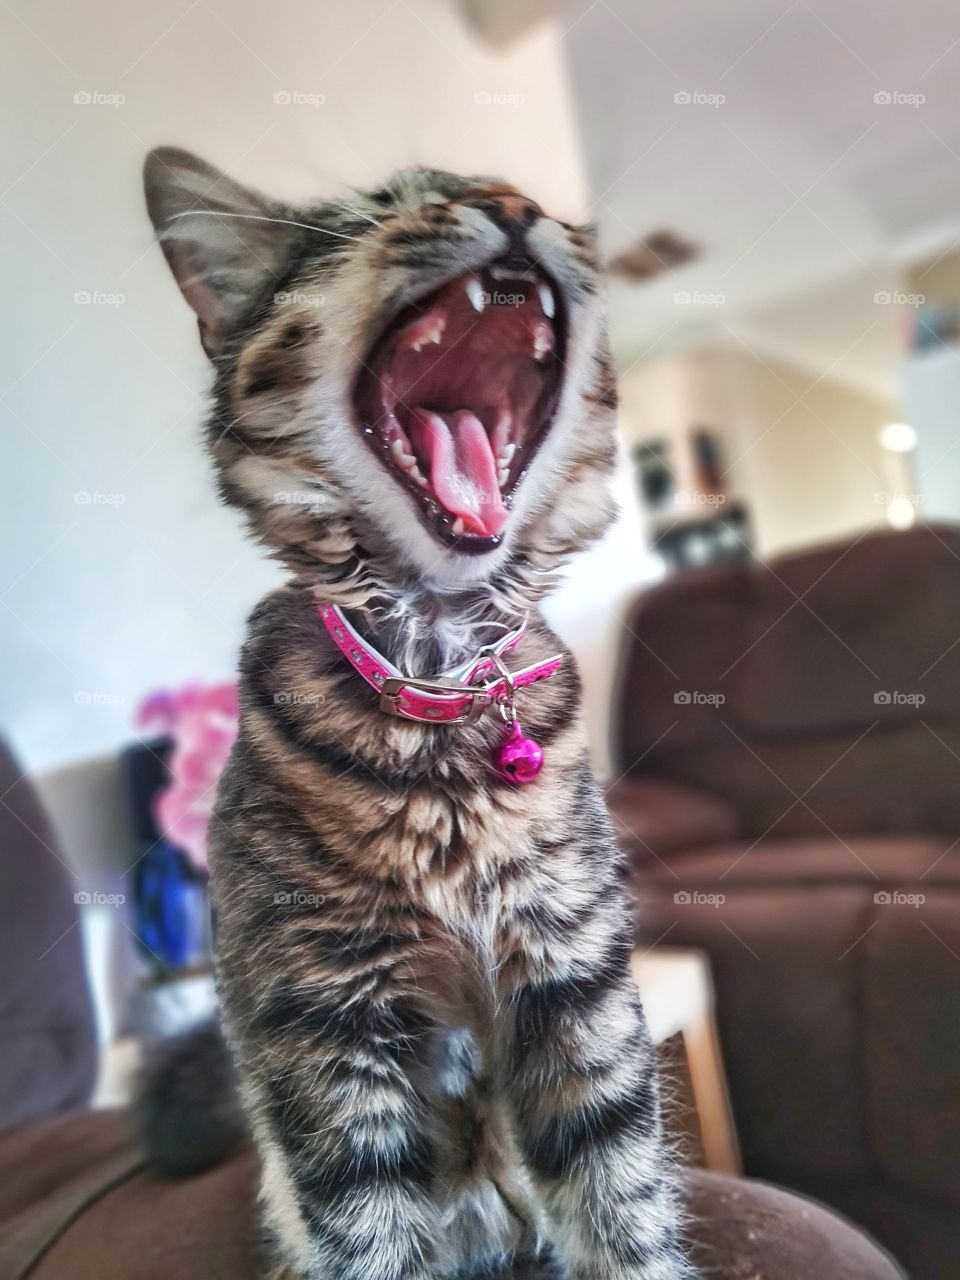 See the mighty kitten and her RAWR!